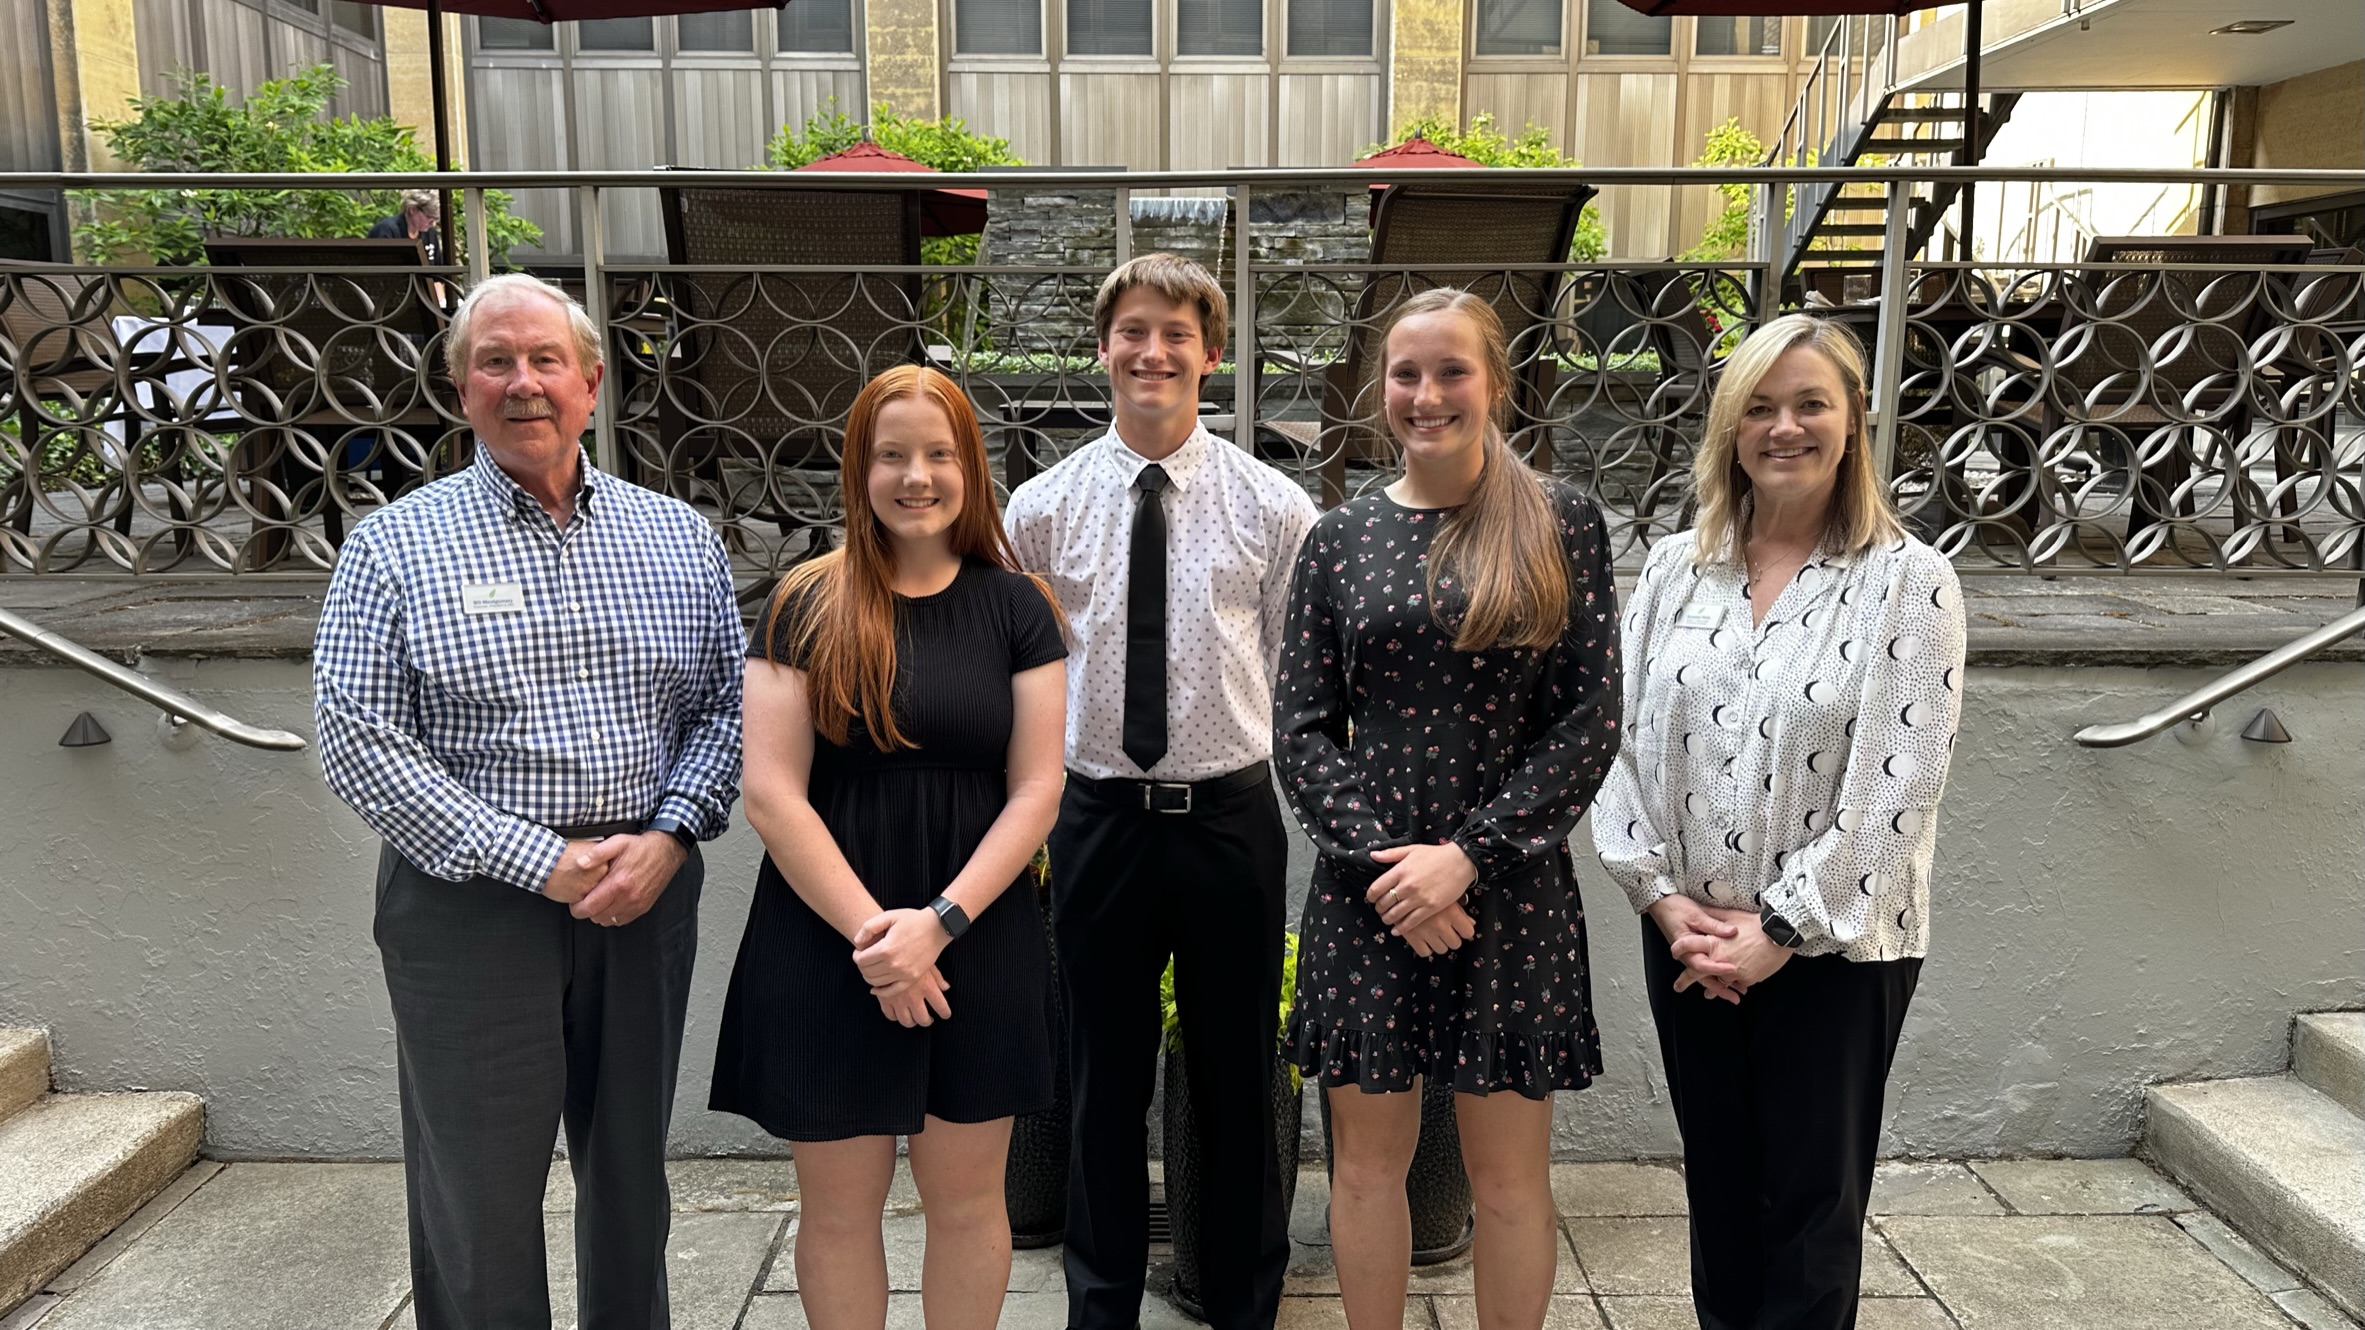 Bill Montgomery, Celina President and CEO, left, and Suzanne Wells, Celina Director of Internal Audit and Corporate Secretary, right, stand with this year’s scholarship recipients. The recipients are pictured left to right: Kennedy Voskuhl, Ray Purdy and Jenna Leugers.